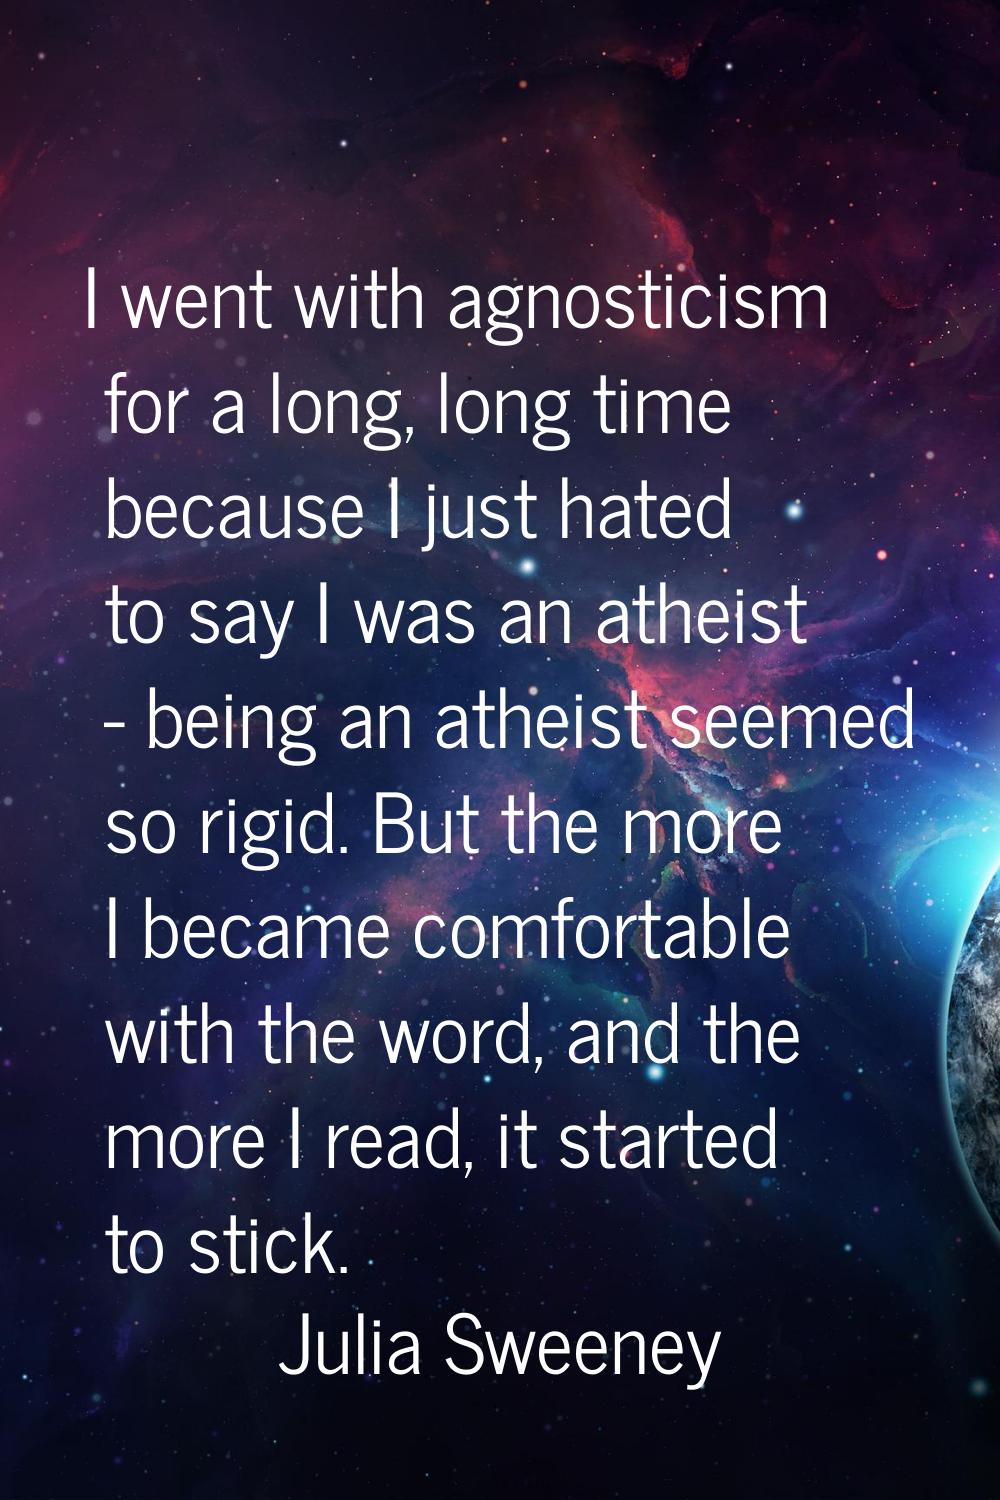 I went with agnosticism for a long, long time because I just hated to say I was an atheist - being 